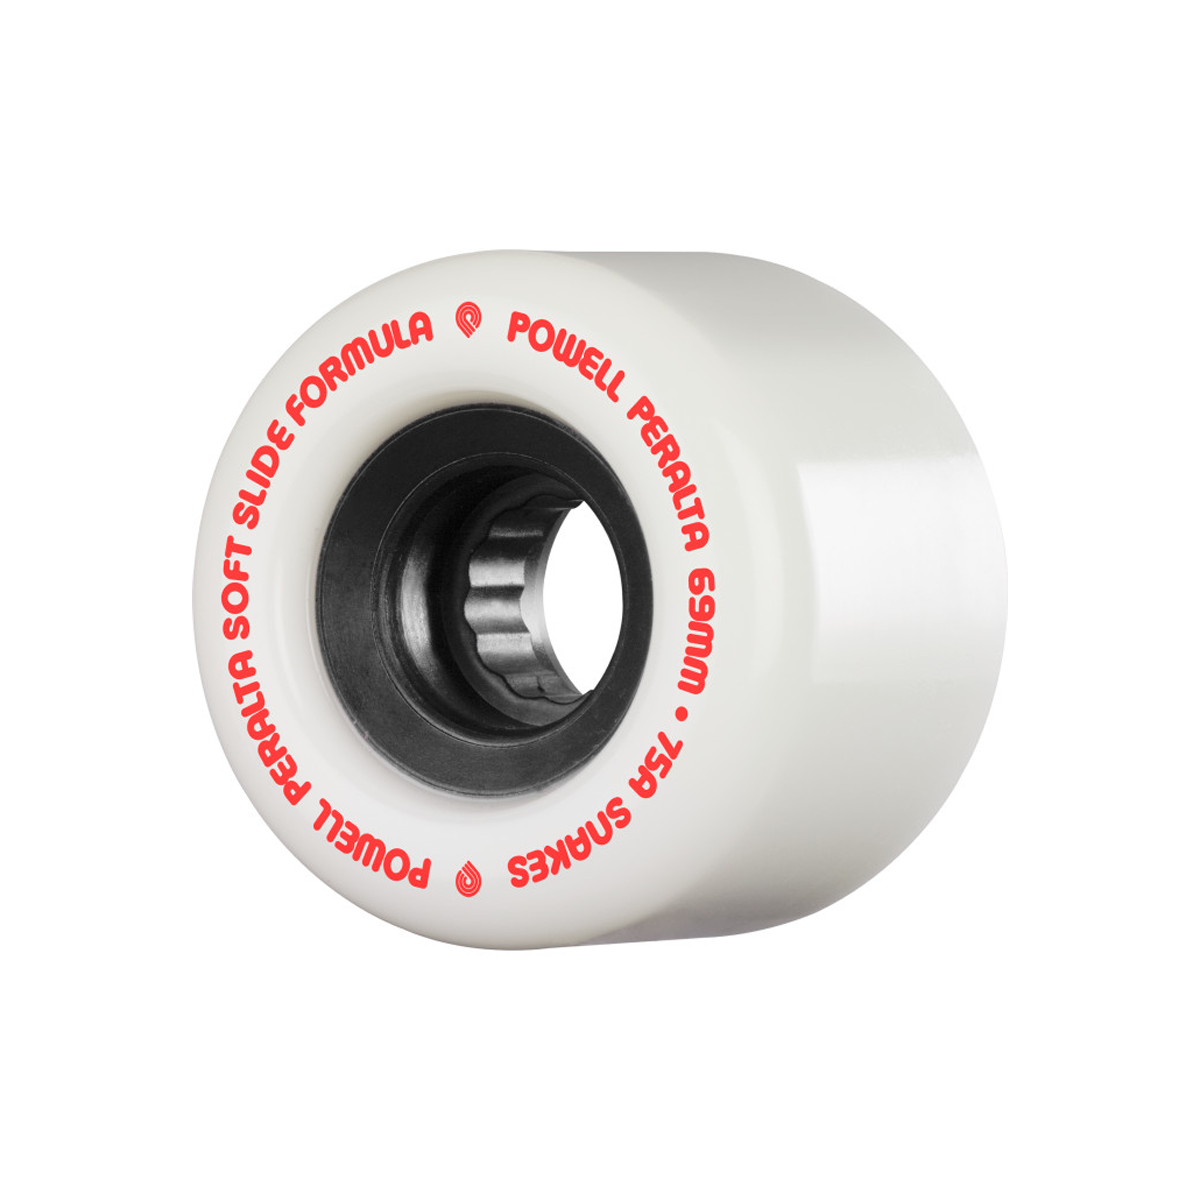 Powell Peralta Snakes Longboard Wheels - 75a 69mm white